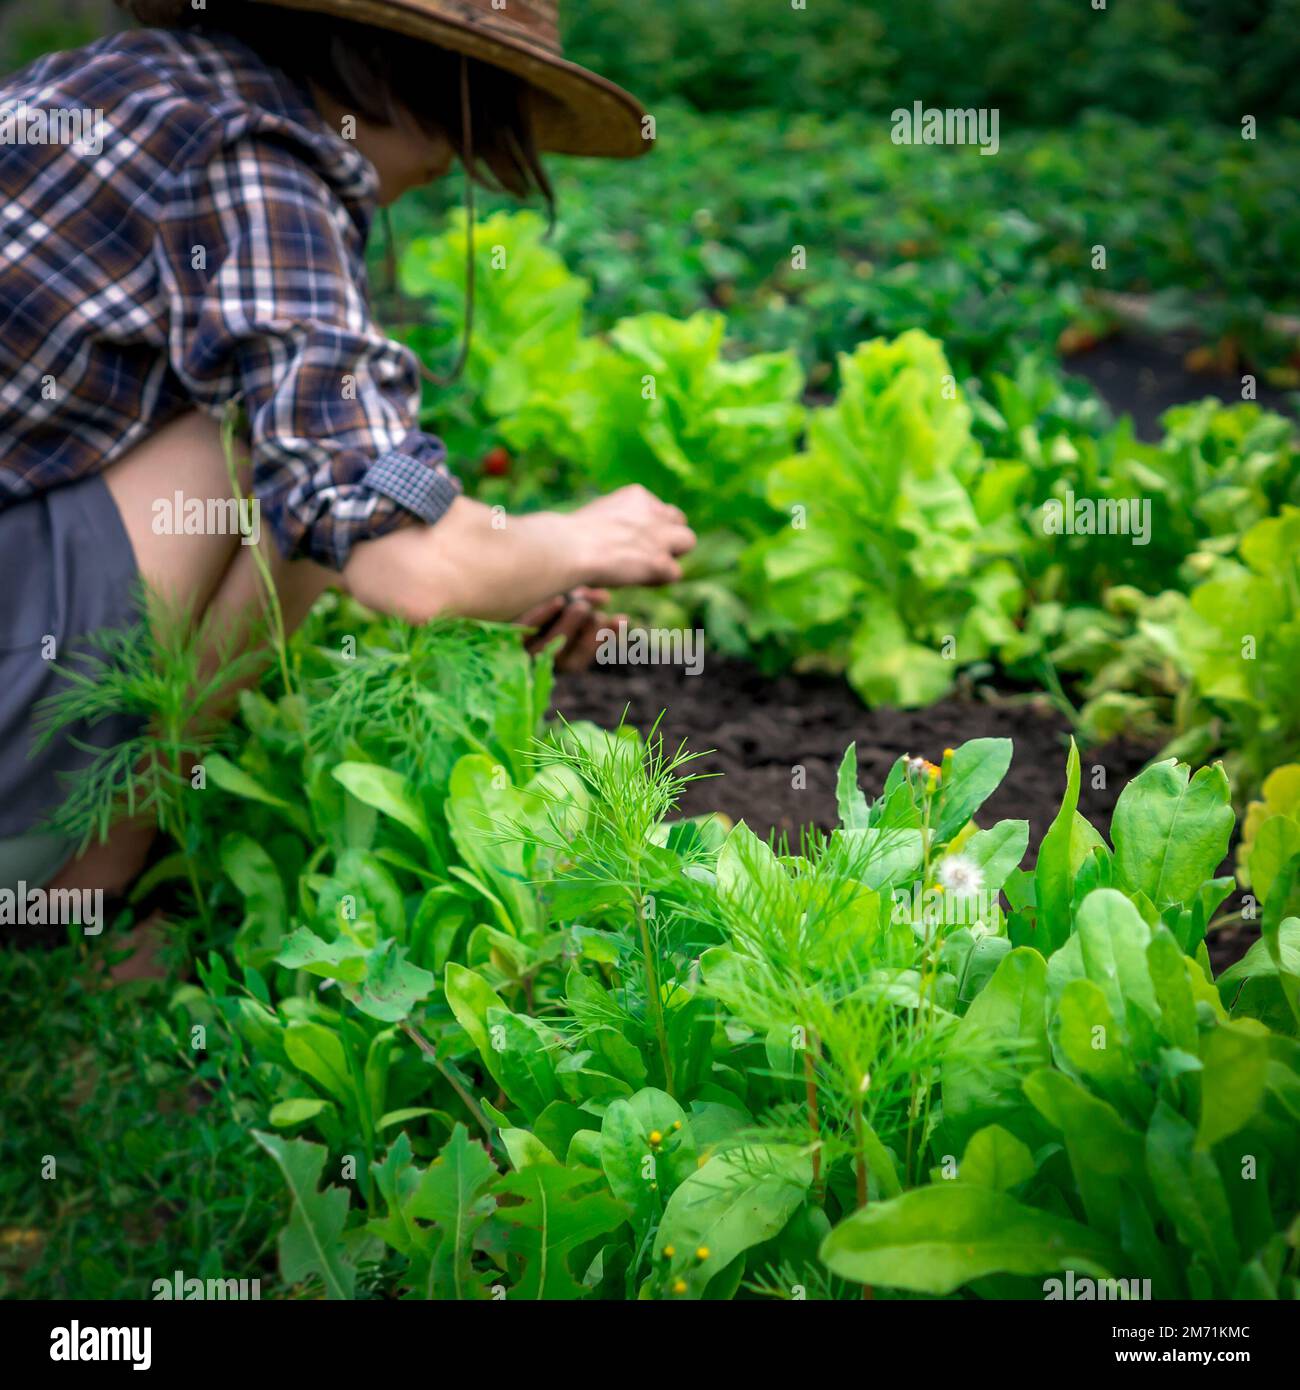 Girl is farming, working in the vegetable garden. Stock Photo